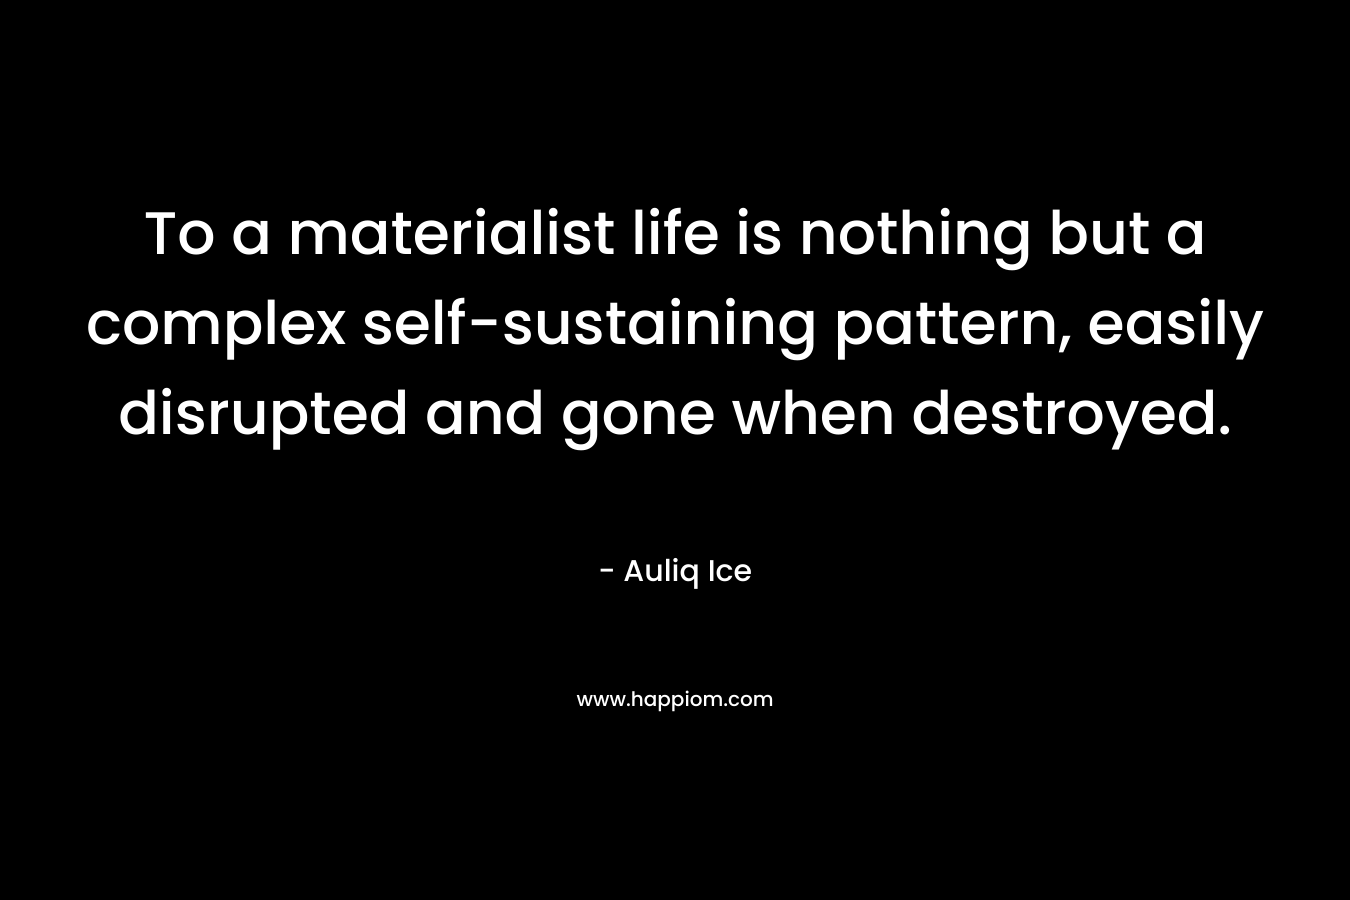 To a materialist life is nothing but a complex self-sustaining pattern, easily disrupted and gone when destroyed.